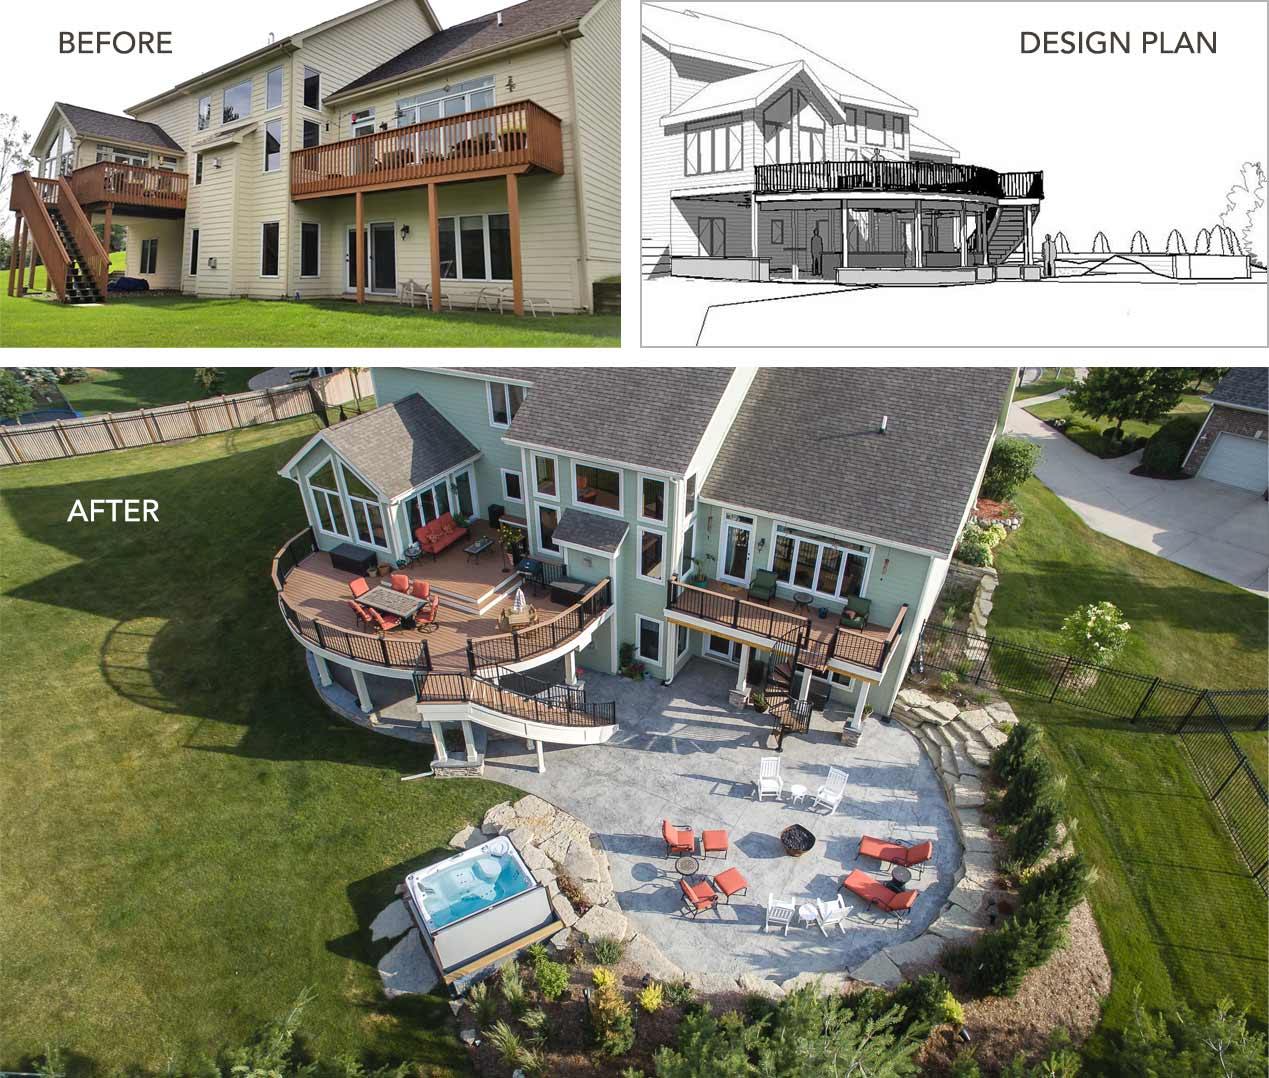 before and after photos and design plan for curved deck and patio with outdoor spa by Silent Rivers, Des Moines, featured at home shows